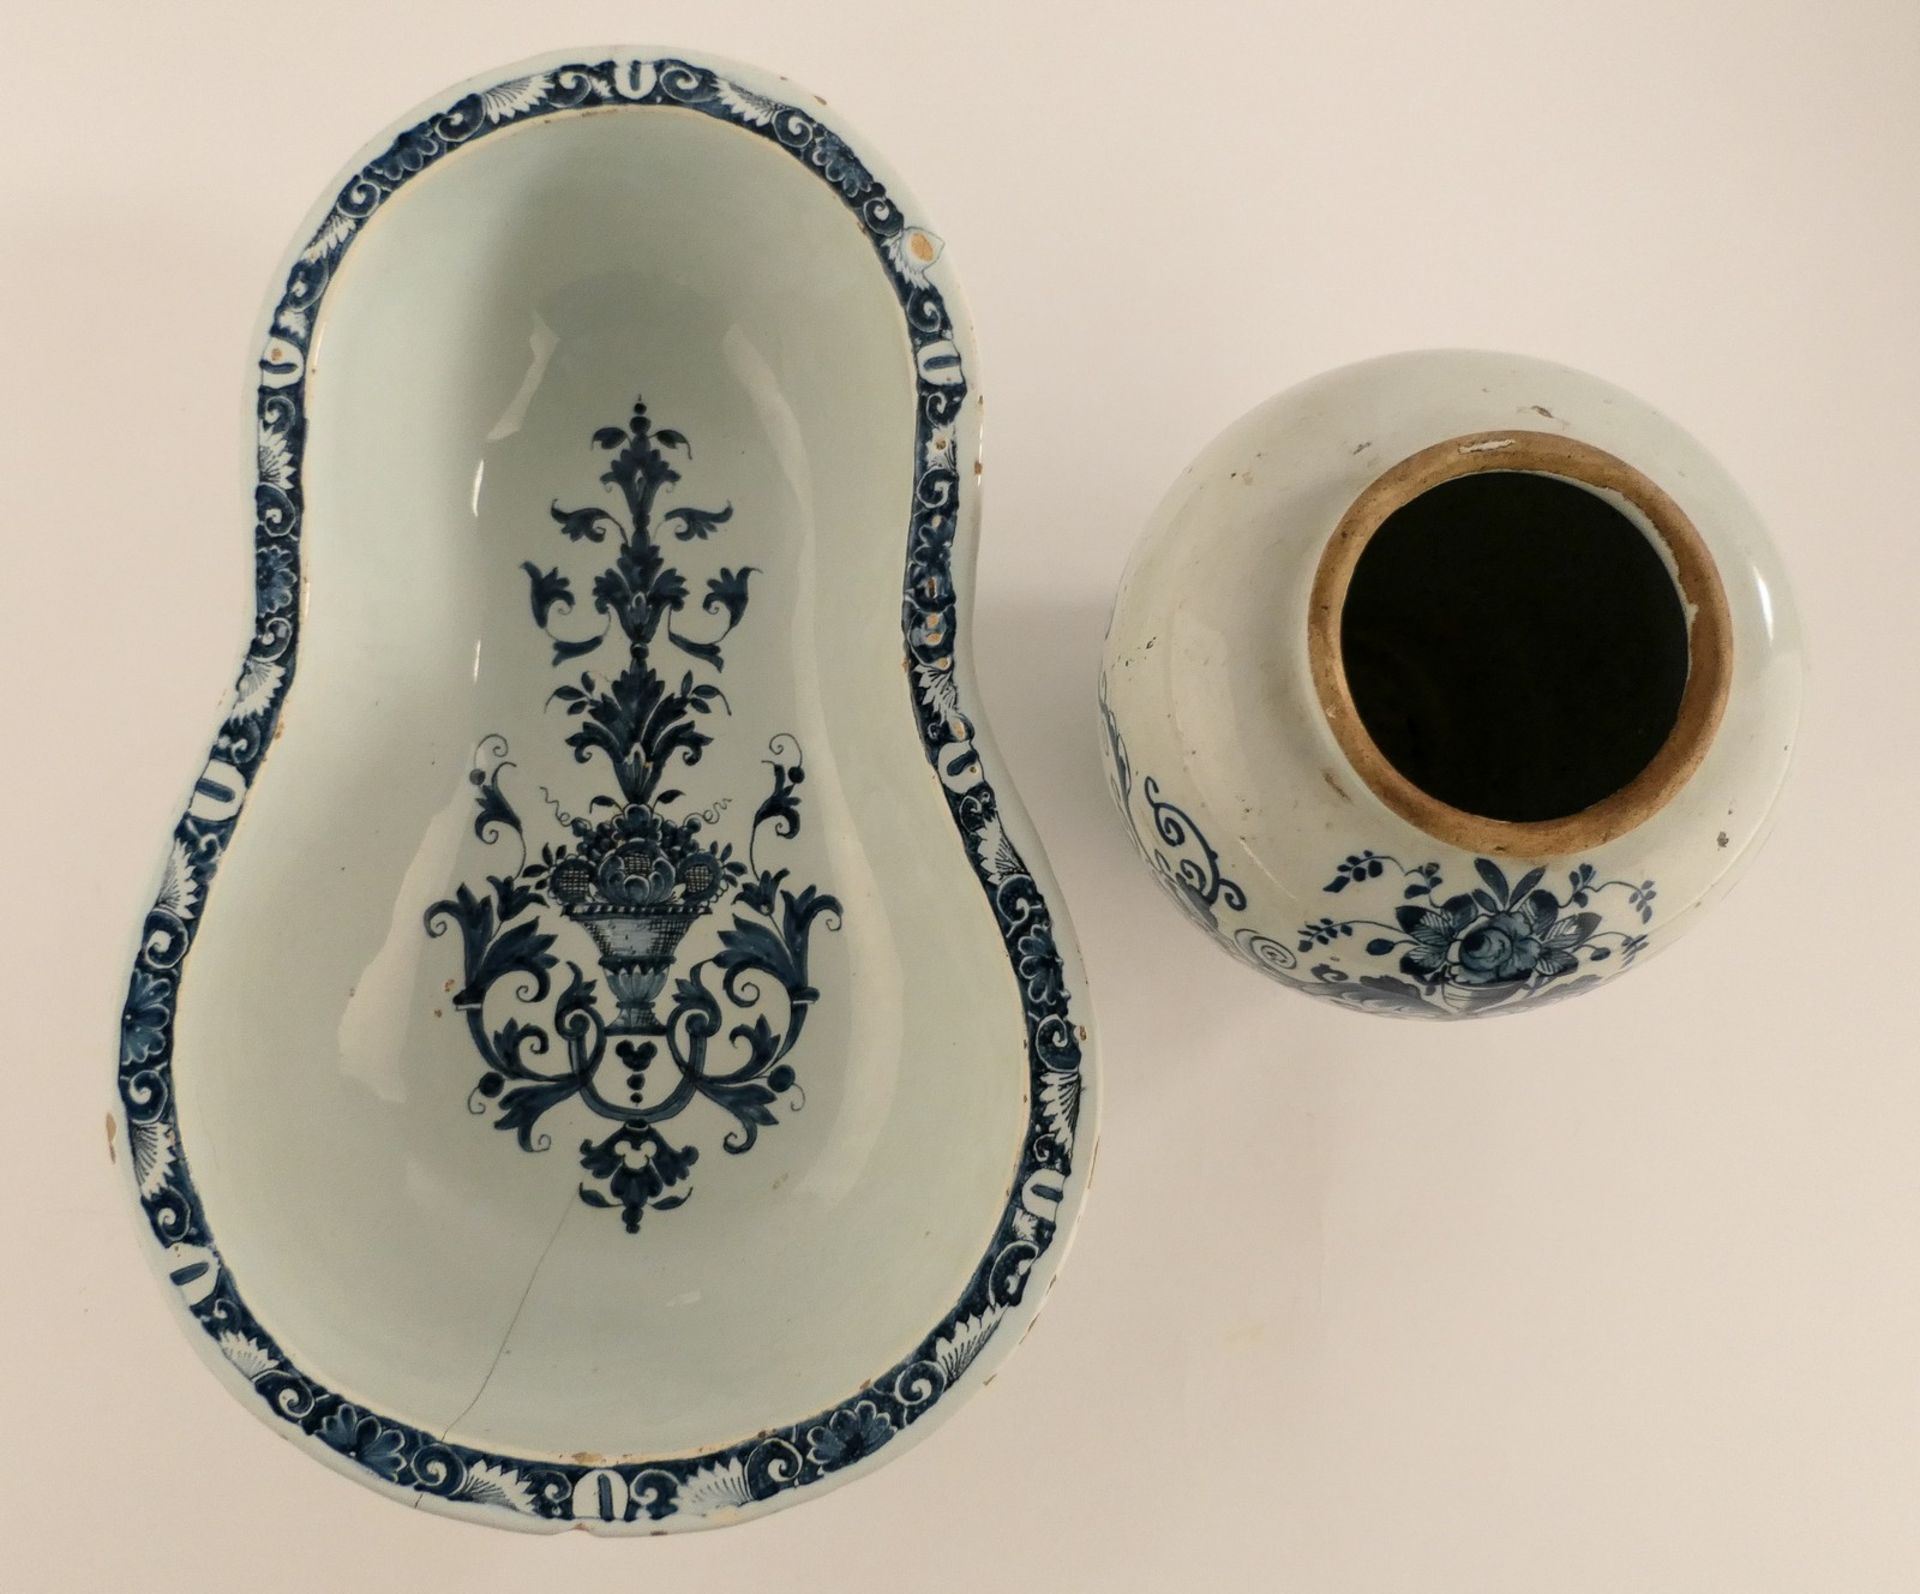 A French blue and white decorated earthenware bidet, probably Rouen, 18thC, H 43,5 - B 28,5 cm ( - Image 3 of 11